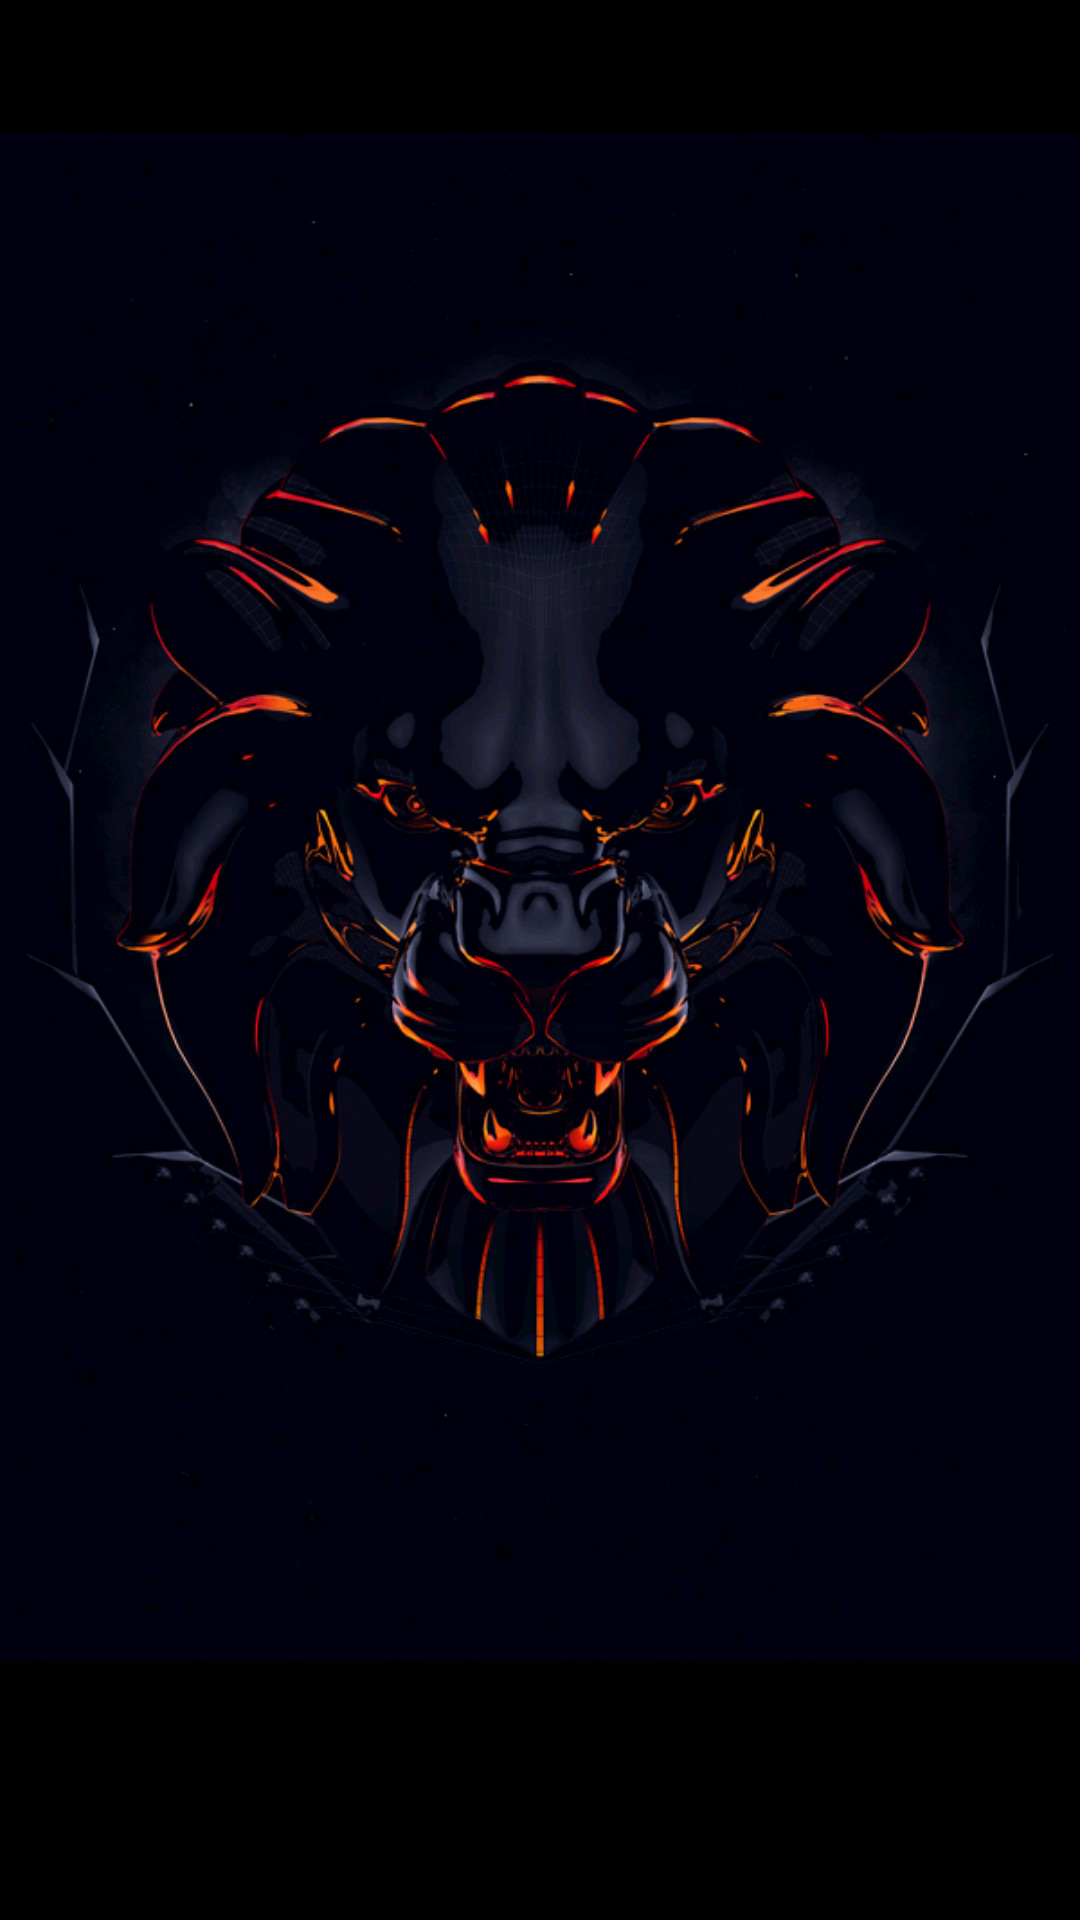 1080x1920 I share you this animated lion's head picture as one of the coolest badass  wallpapers for Android phones. This wallpaper is the #17 of all 40 badass  ...